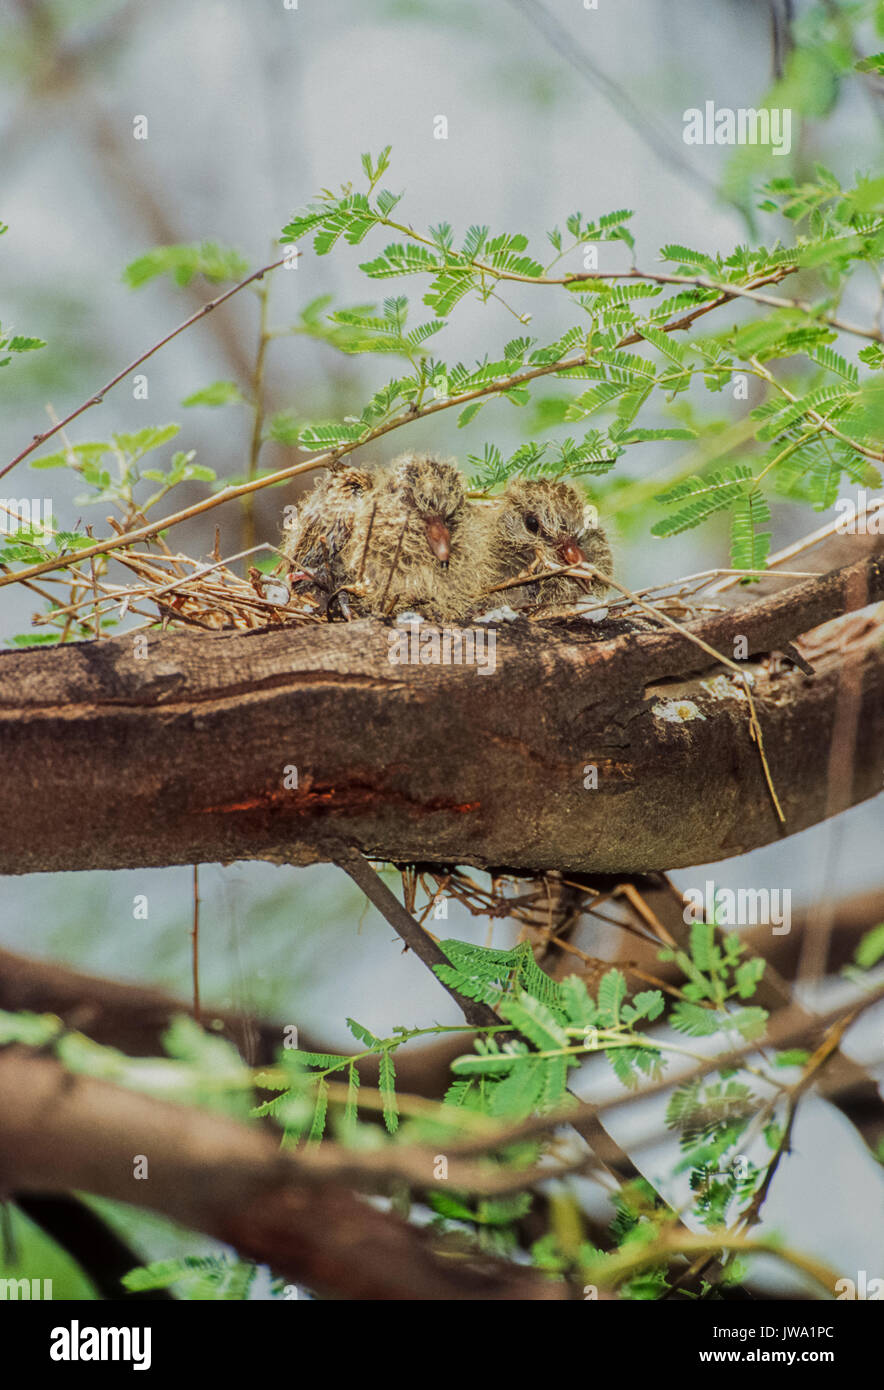 Two Laughing Dove squabs or chicks, (Spilopelia senegalensis), in nest of twigs, Keoladeo Ghana National Park, Bharatpur, Rajasthan, India Stock Photo